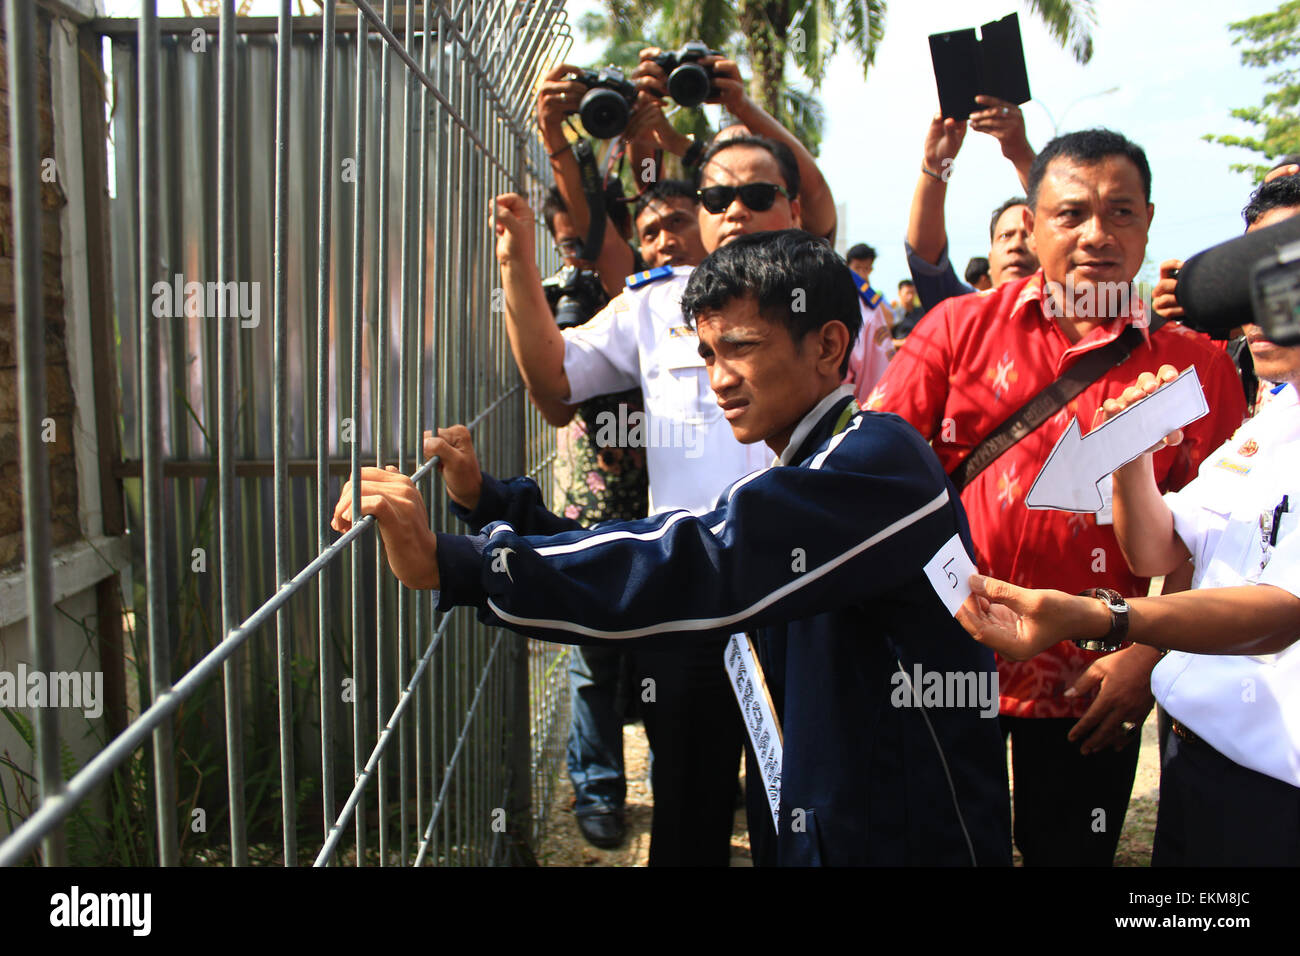 Pekanbaru, Riau, Indonesia. 10th Apr, 2015. RIAU, INDONESIA - APRIL 12: Mario Steven Ambarita escorted by Indonesia Police reset on the air infiltration case at Sultan Syarif Kasim II airport on April 10, 2015 in Pekanbaru, Indonesia. Mario Steven Ambarita has suspect for violating the Aviation Law due to reckless action broke into Sultan Syarif Kasim II Airport and infiltrate into the rear wheels Garuda Indonesia to Jakarta. © Sijori Images/ZUMA Wire/Alamy Live News Stock Photo